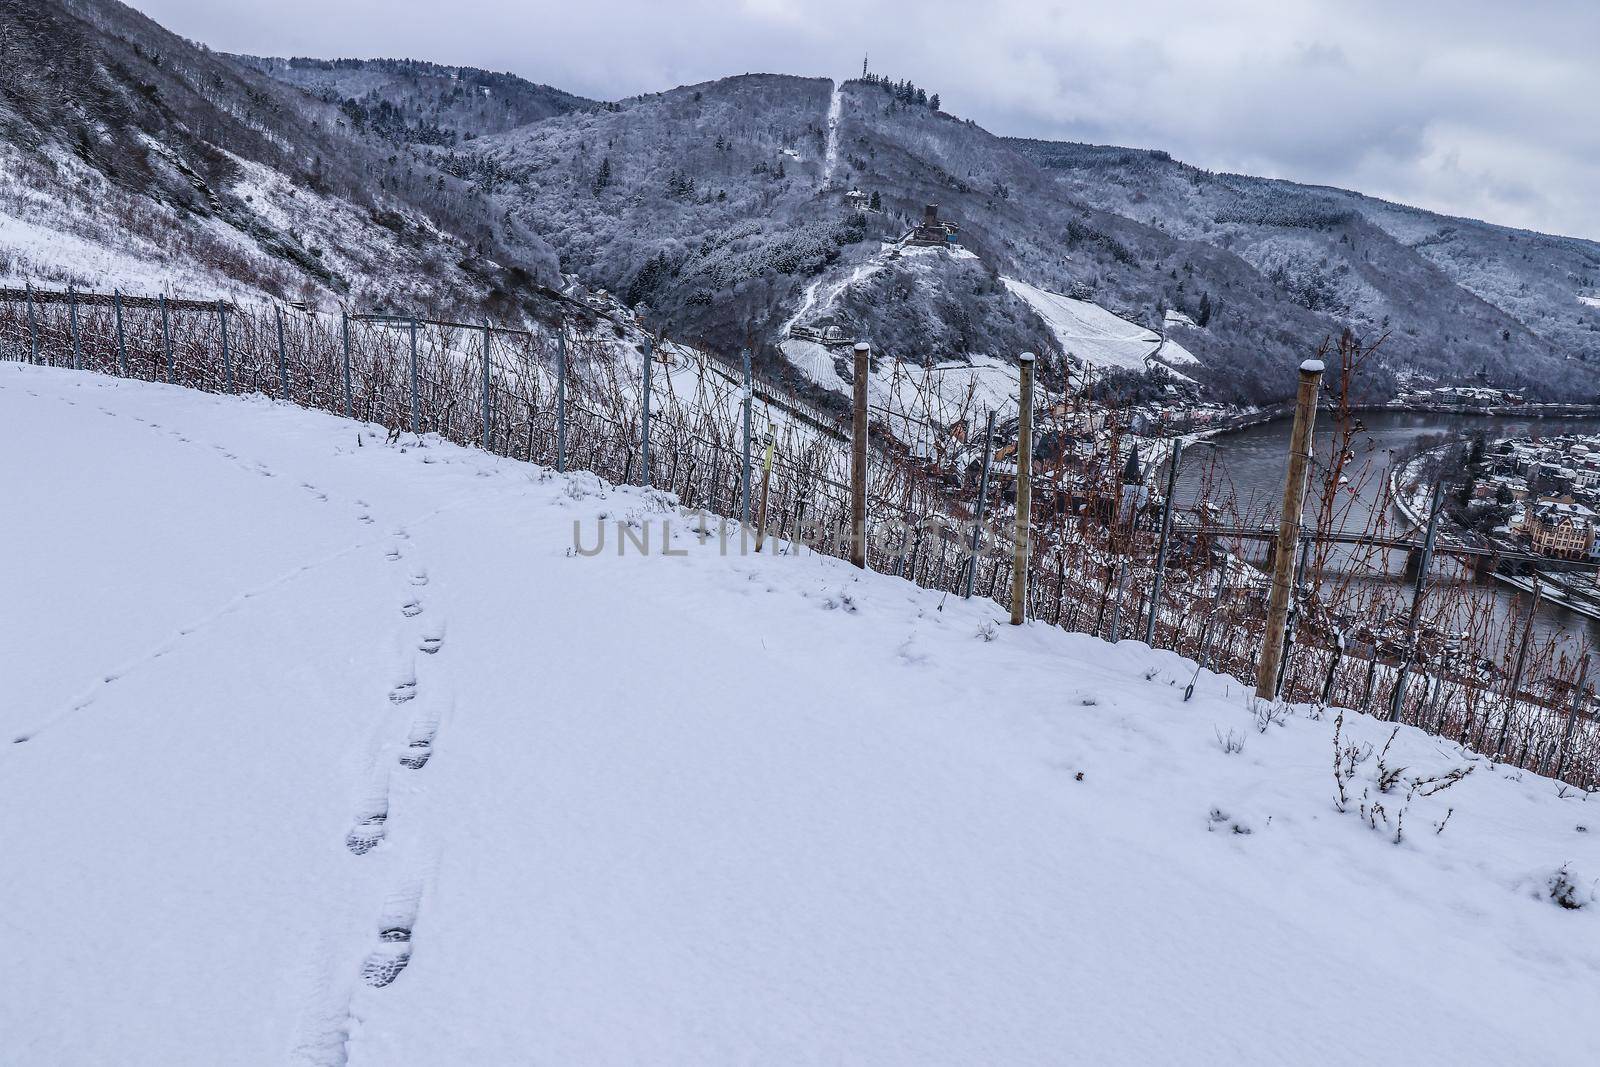 Foot prints on the snow leading to the vineyard in Bernkastel-kues, Germany